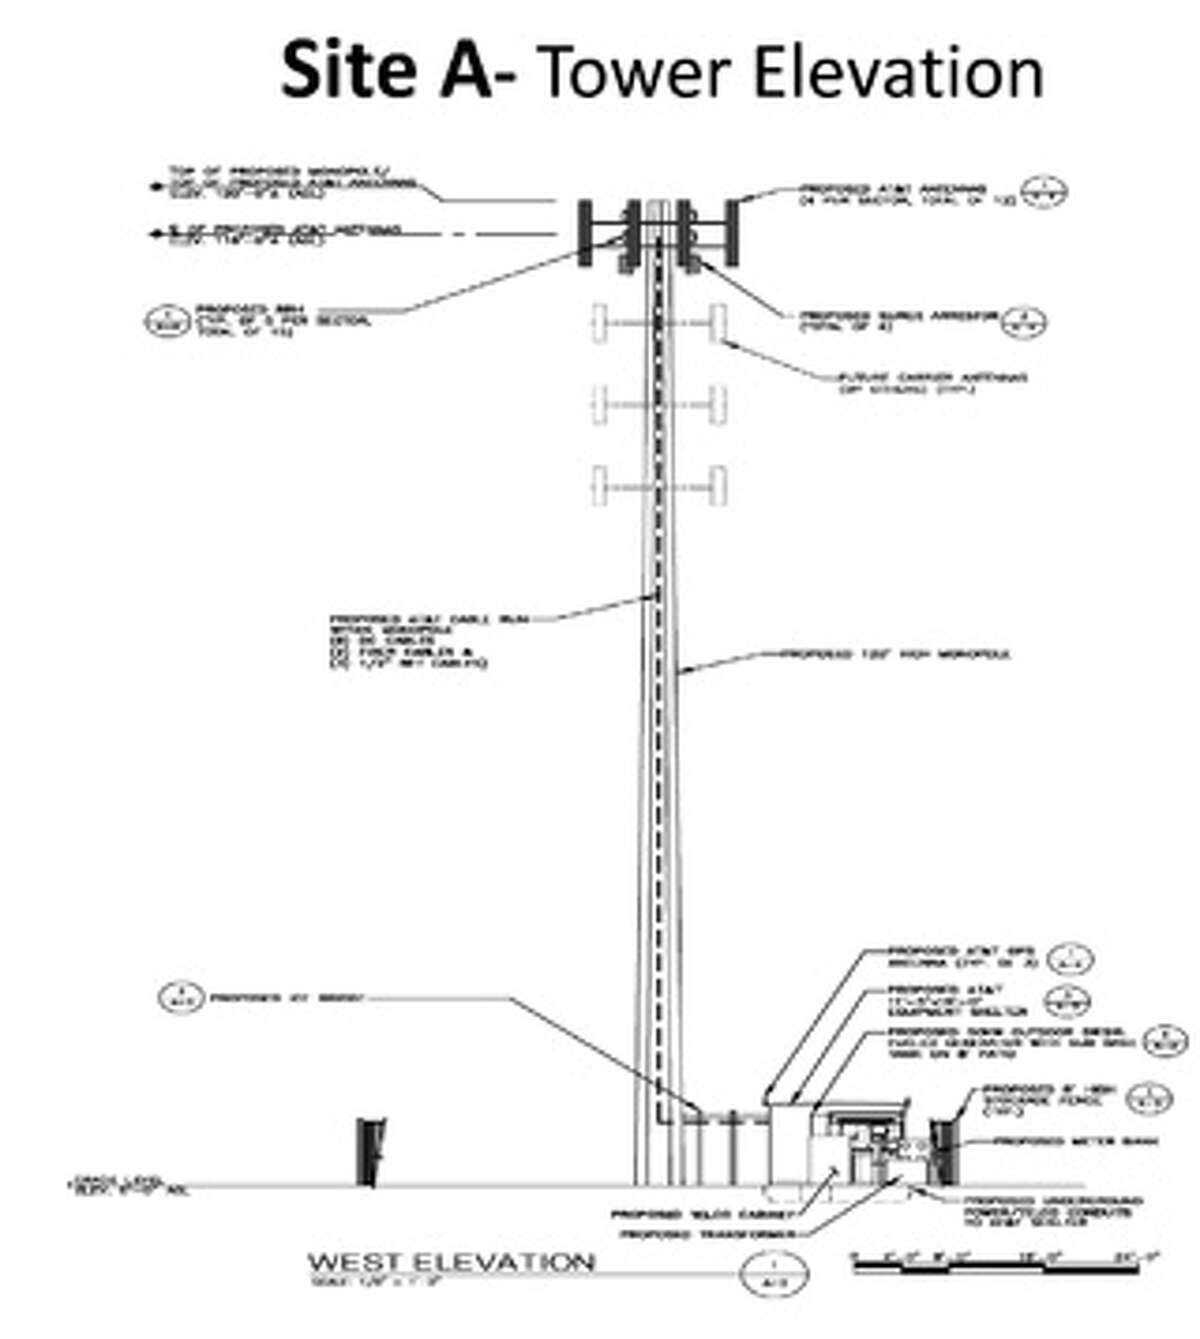 A rendering of the AT&T monopole cell tower that could be proposed for Site A, off Perry Hill Road on Highland Golf Club property